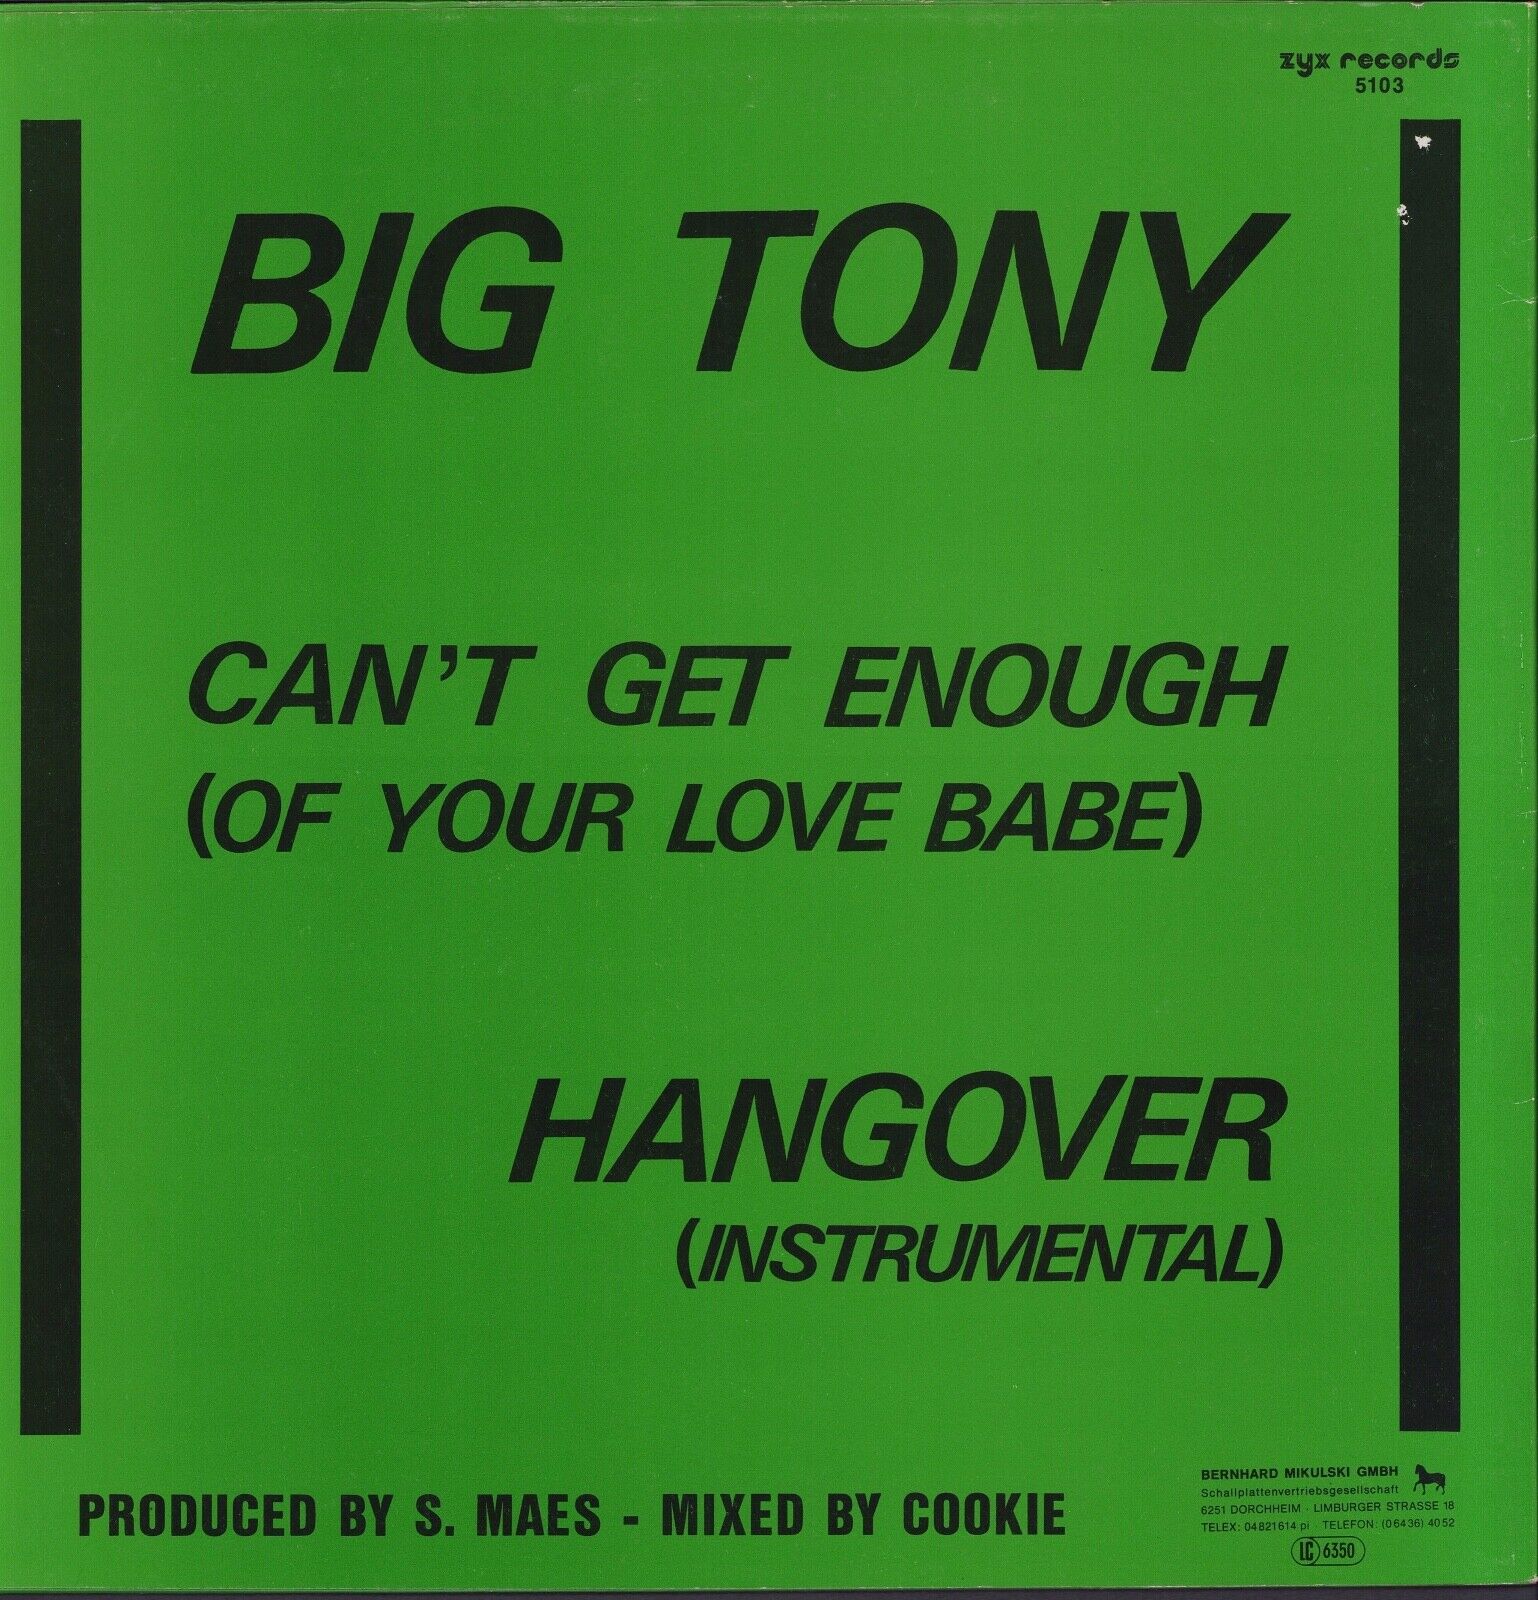 Big Tony ‎- Can't Get Enough Of Your Love Babe Vinyl 12"